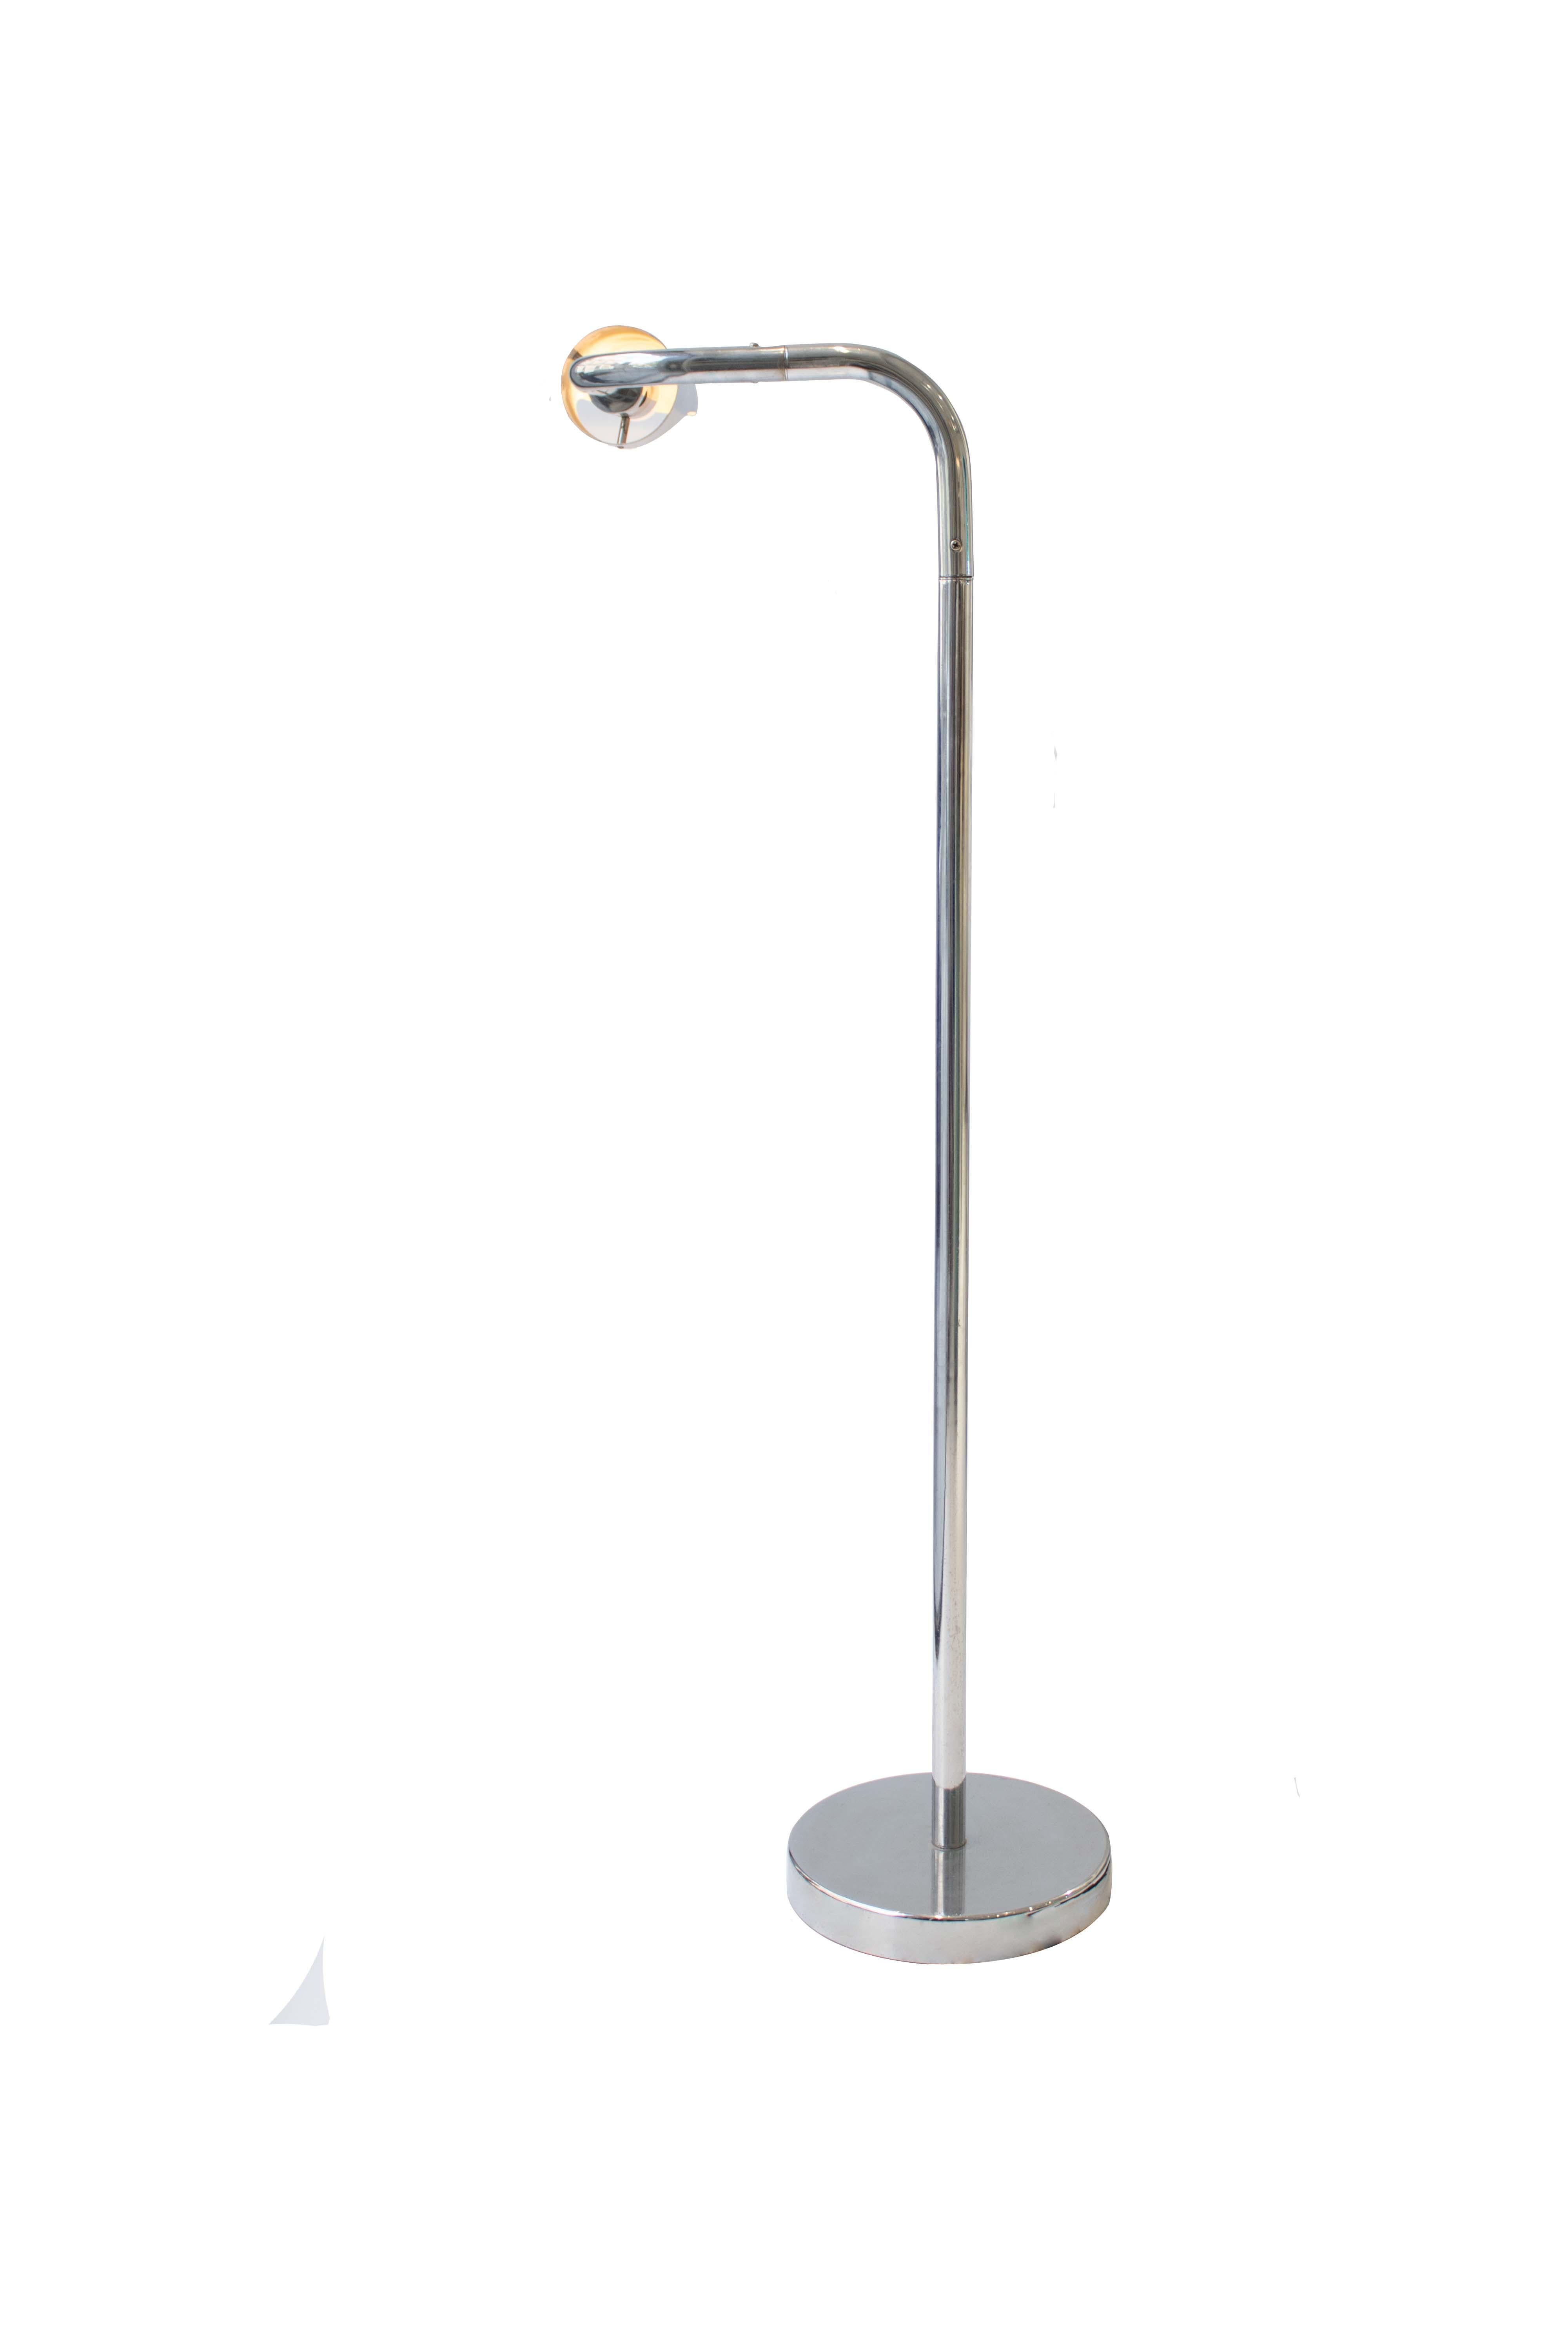 Italian chromed tube floor Lamp, dated to the ``Space Age´´, the 1960s.
It consists of a flat round base and a tube leg. The lampshade is connected to a bending rotating tube that can be tilted up and down.

Measurements:
Base: 26